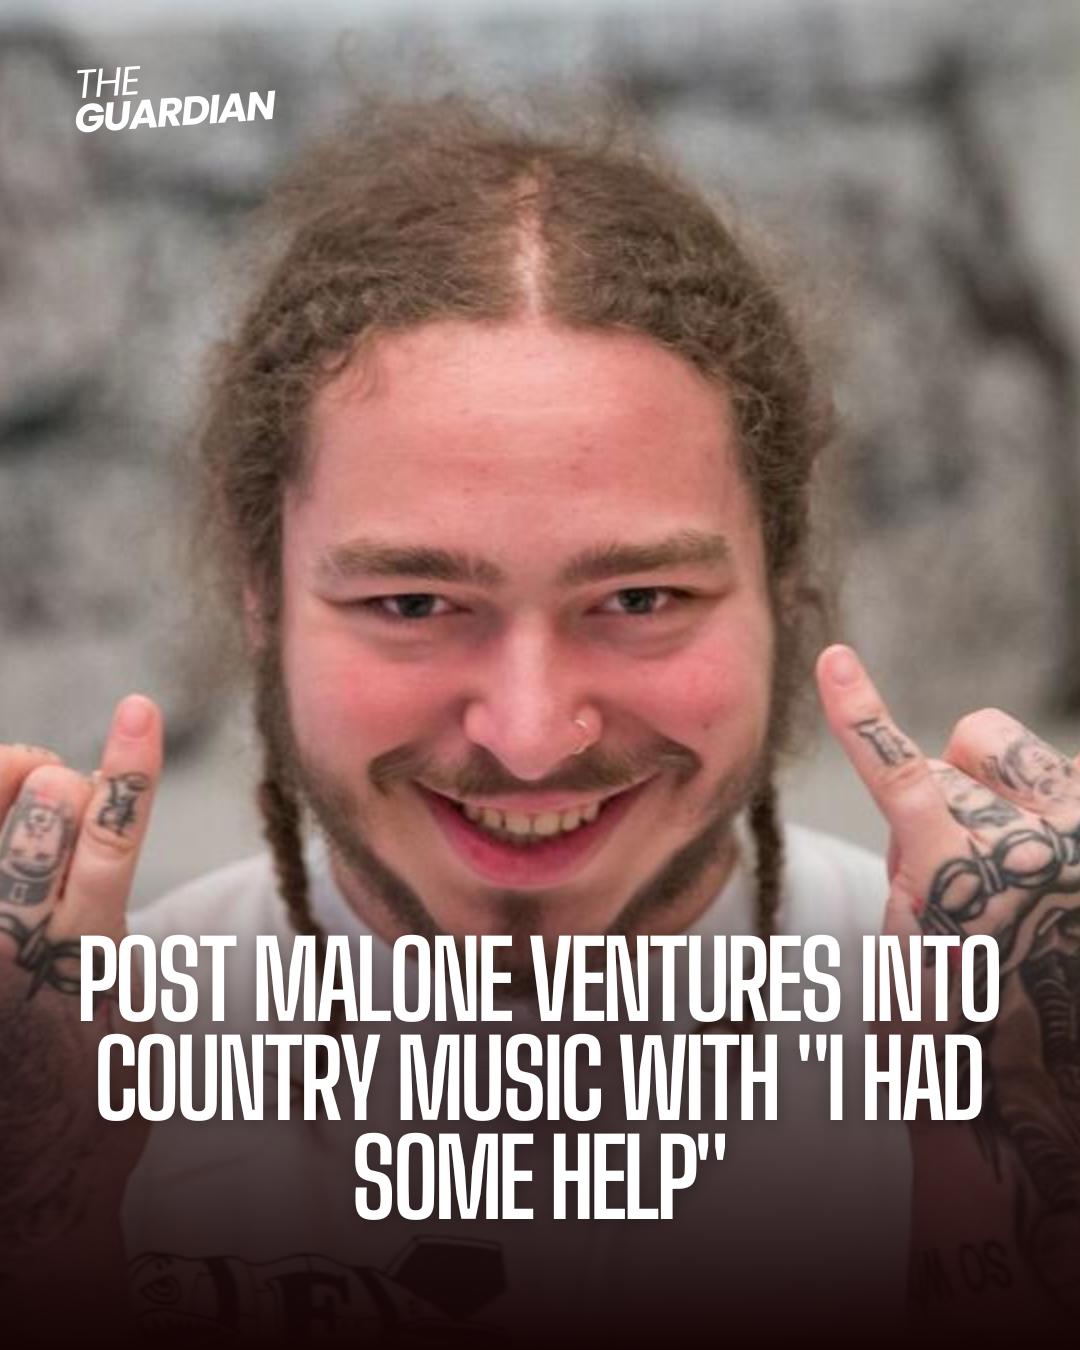 Post Malone, most renowned for his hip-hop, just made his step into the country genre with his latest song release.